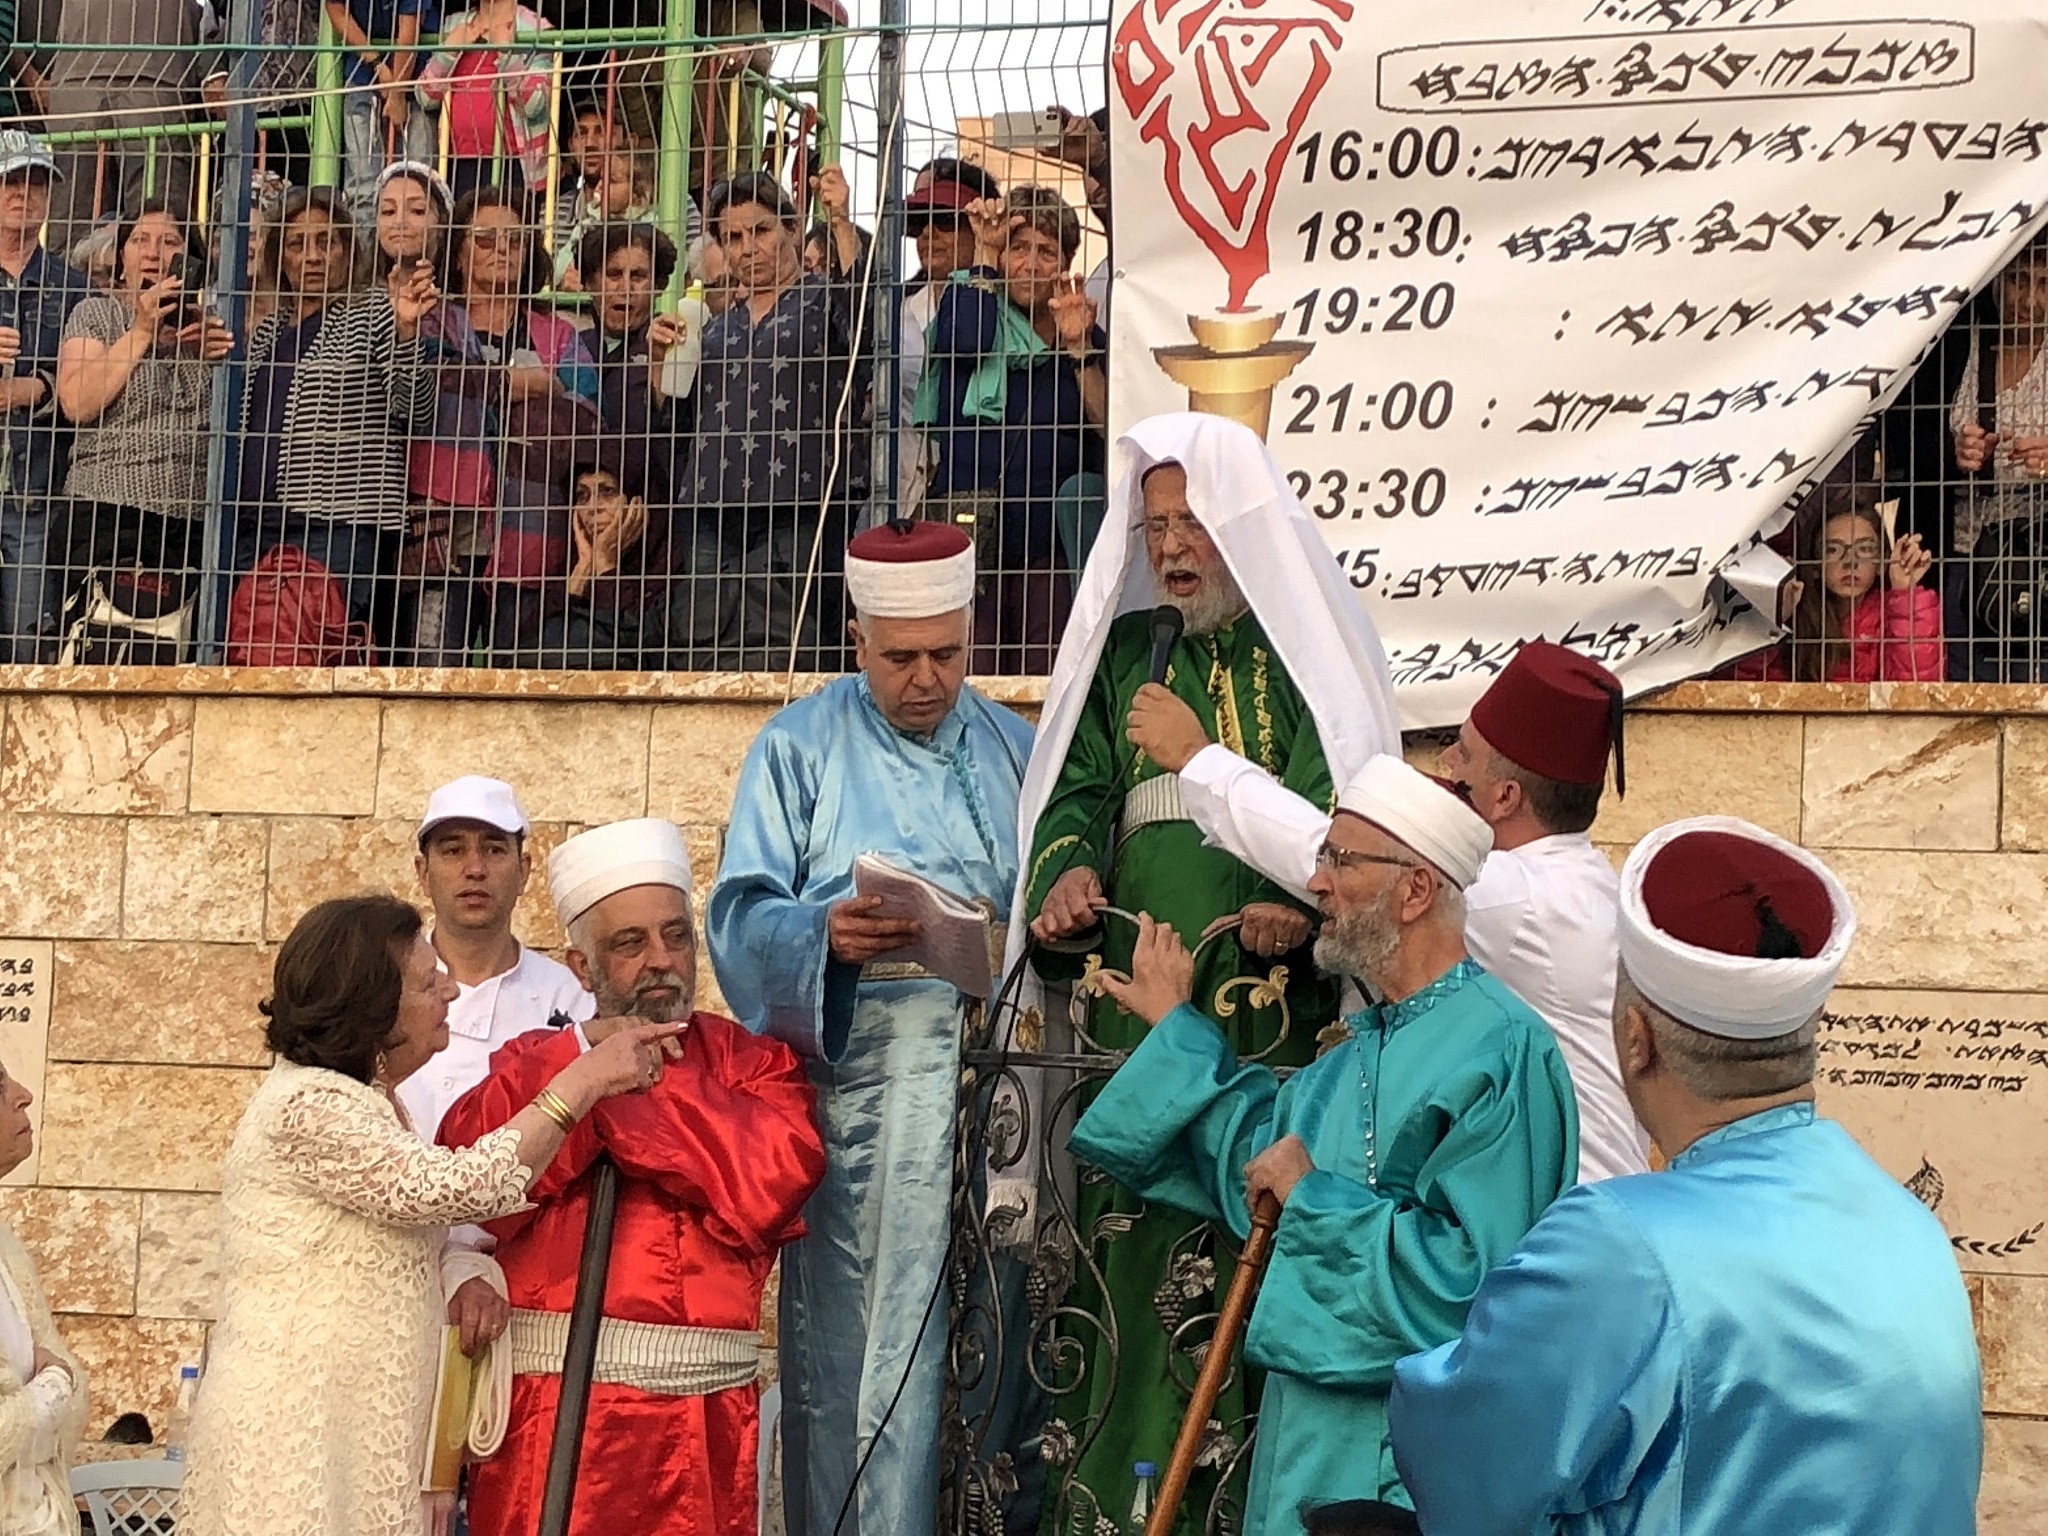 The Samaritan high priest (green garb) leads his tribe in the traditional Passover sacrifice ceremony, where sheep and goats are slaughtered, at Mount Gerizim near the northern West Bank city of Nablus on April 29, 2018. (Jacob Magid/Times of Israel)